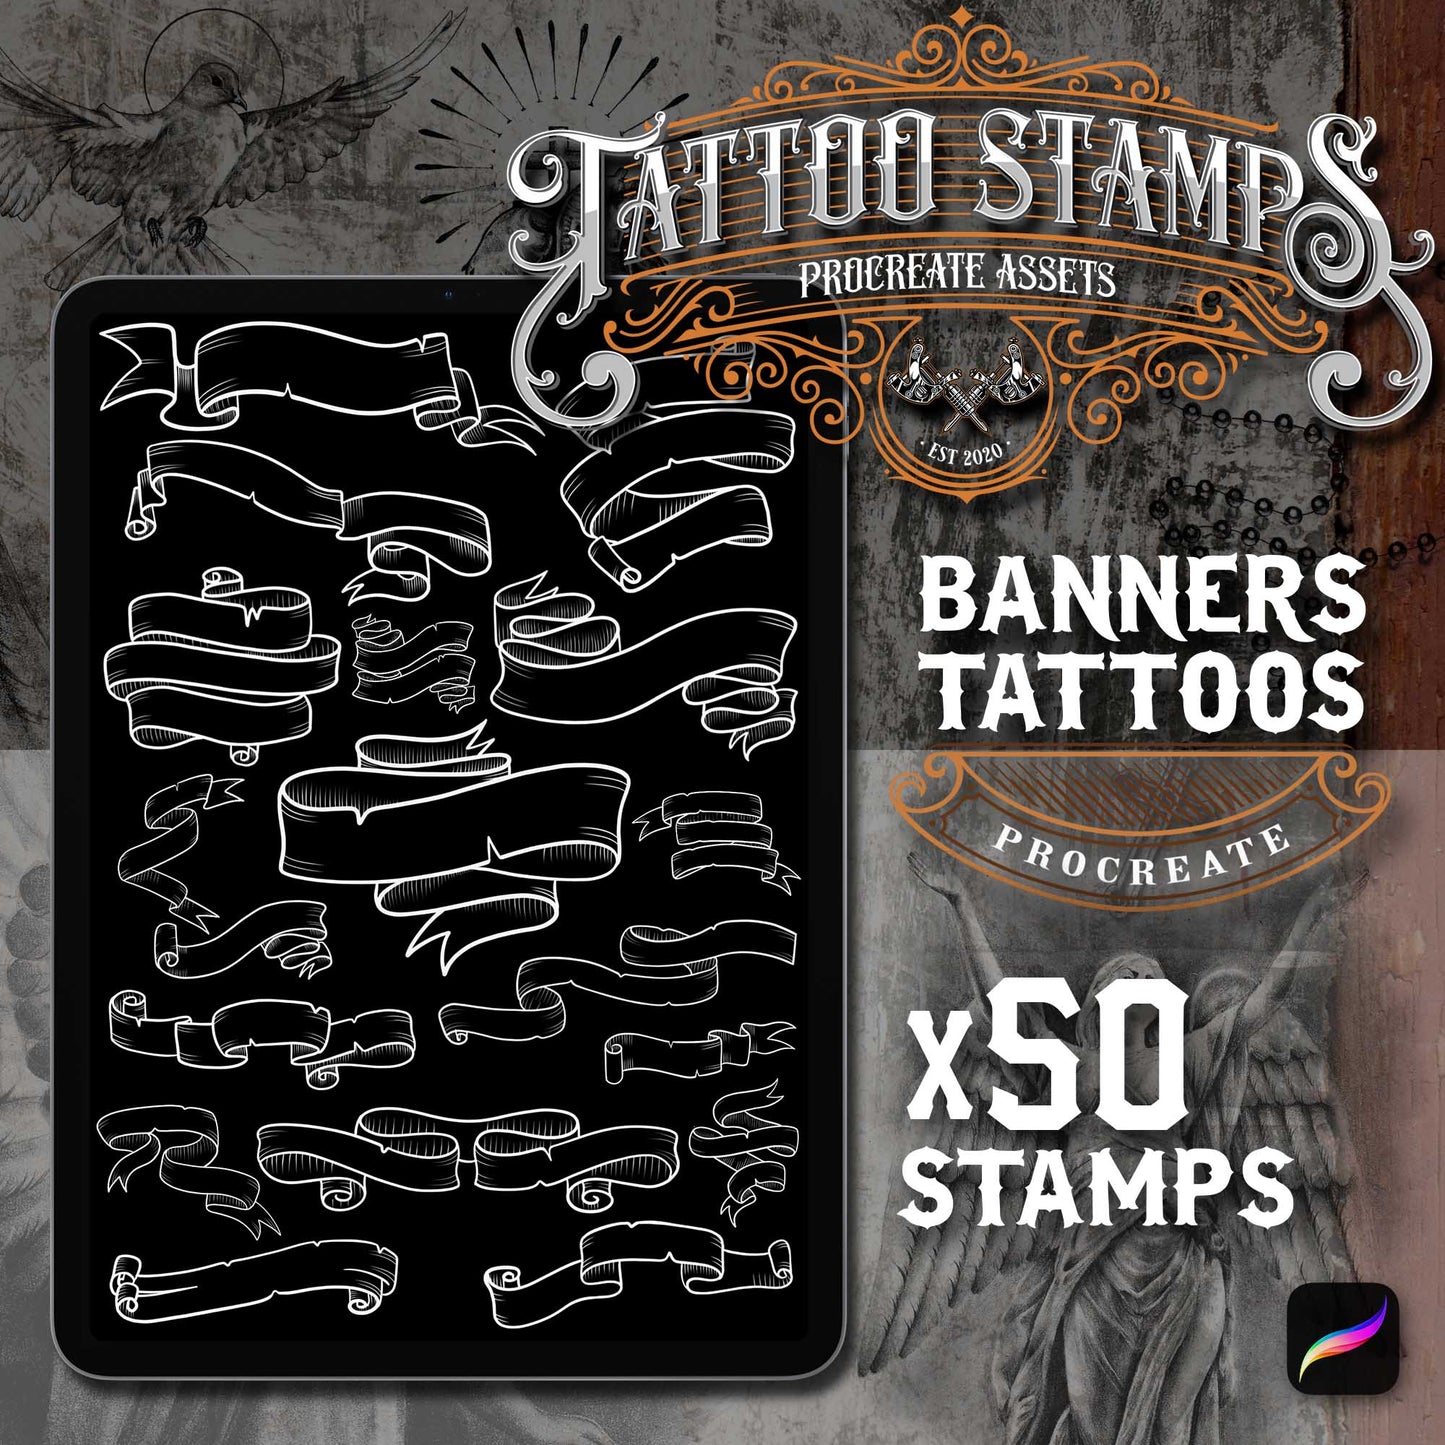 50 Old School Banner Tattoo Procreate app for iPad & iPad pro  in the Master Pack by TattooStampsArt